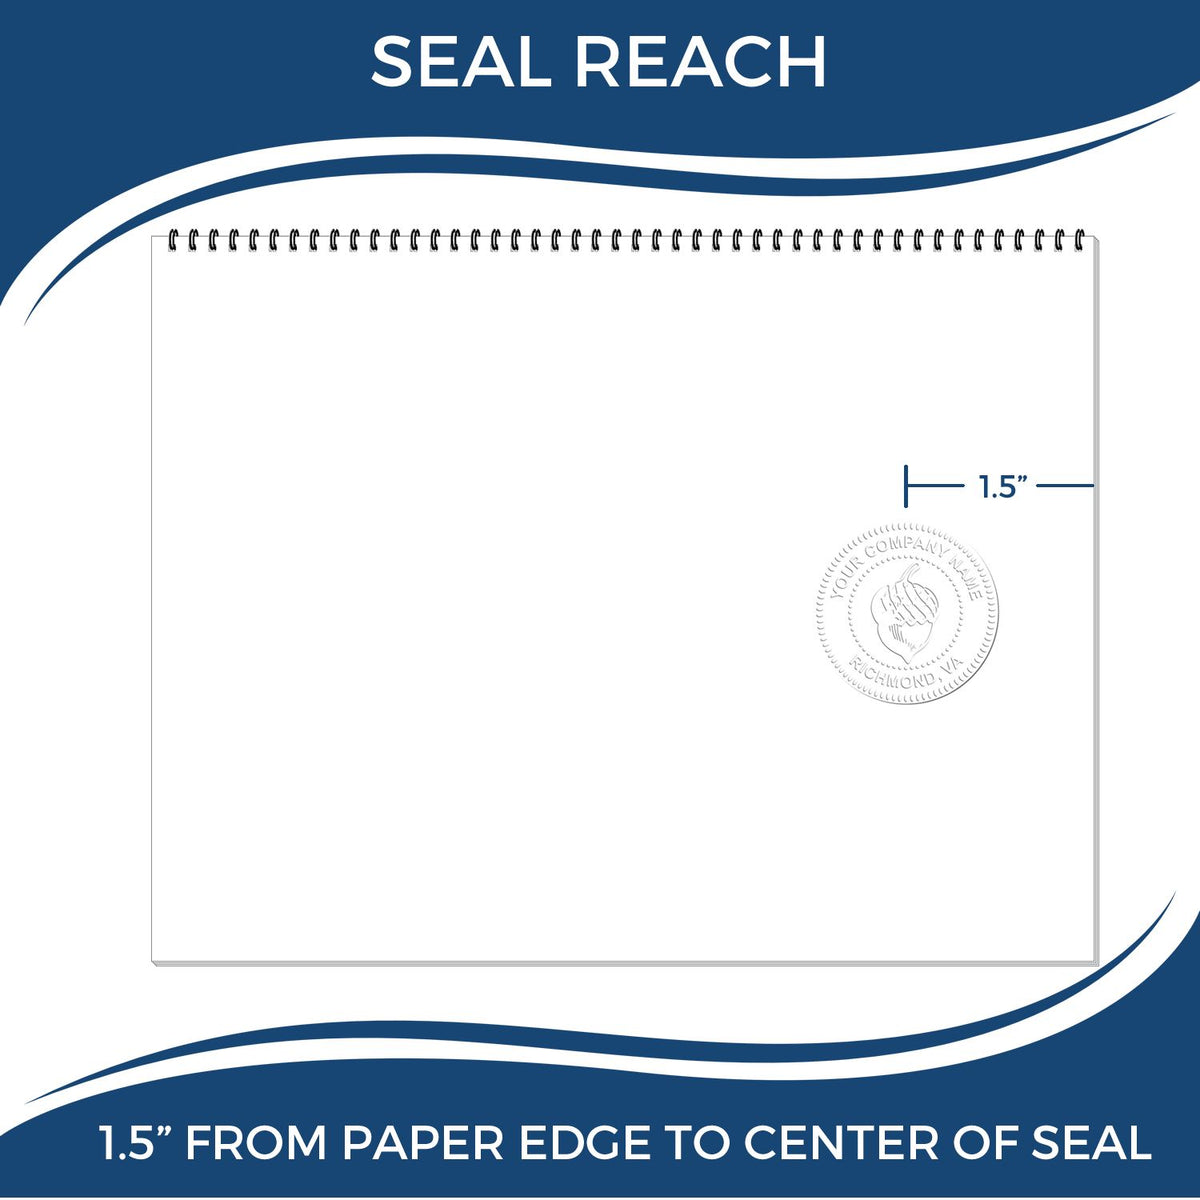 An infographic showing the seal reach which is represented by a ruler and a miniature seal image of the Gift Tennessee Land Surveyor Seal